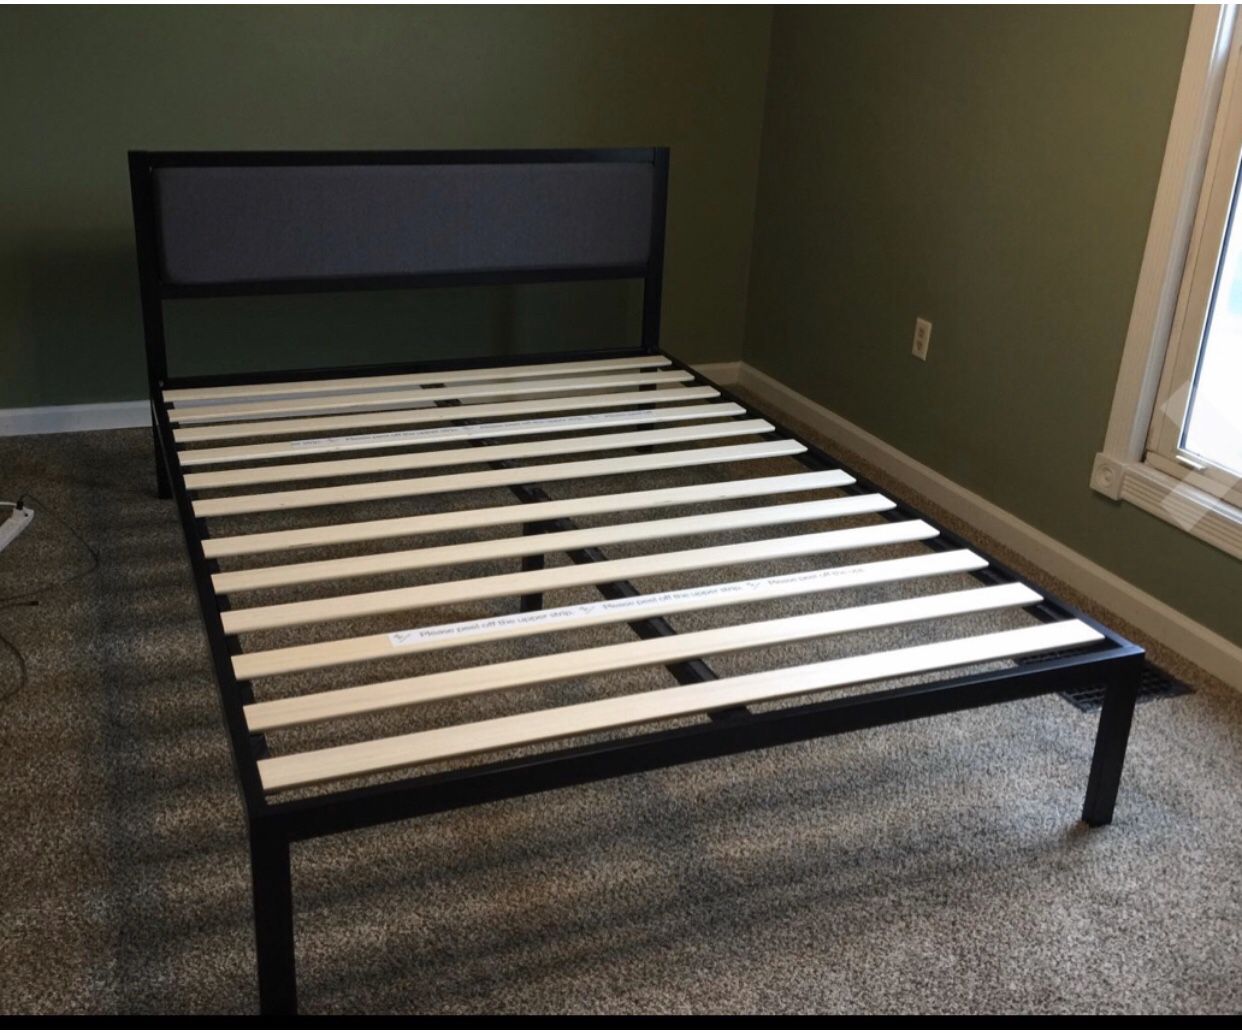 New in a box king size platform bed frame with headboard